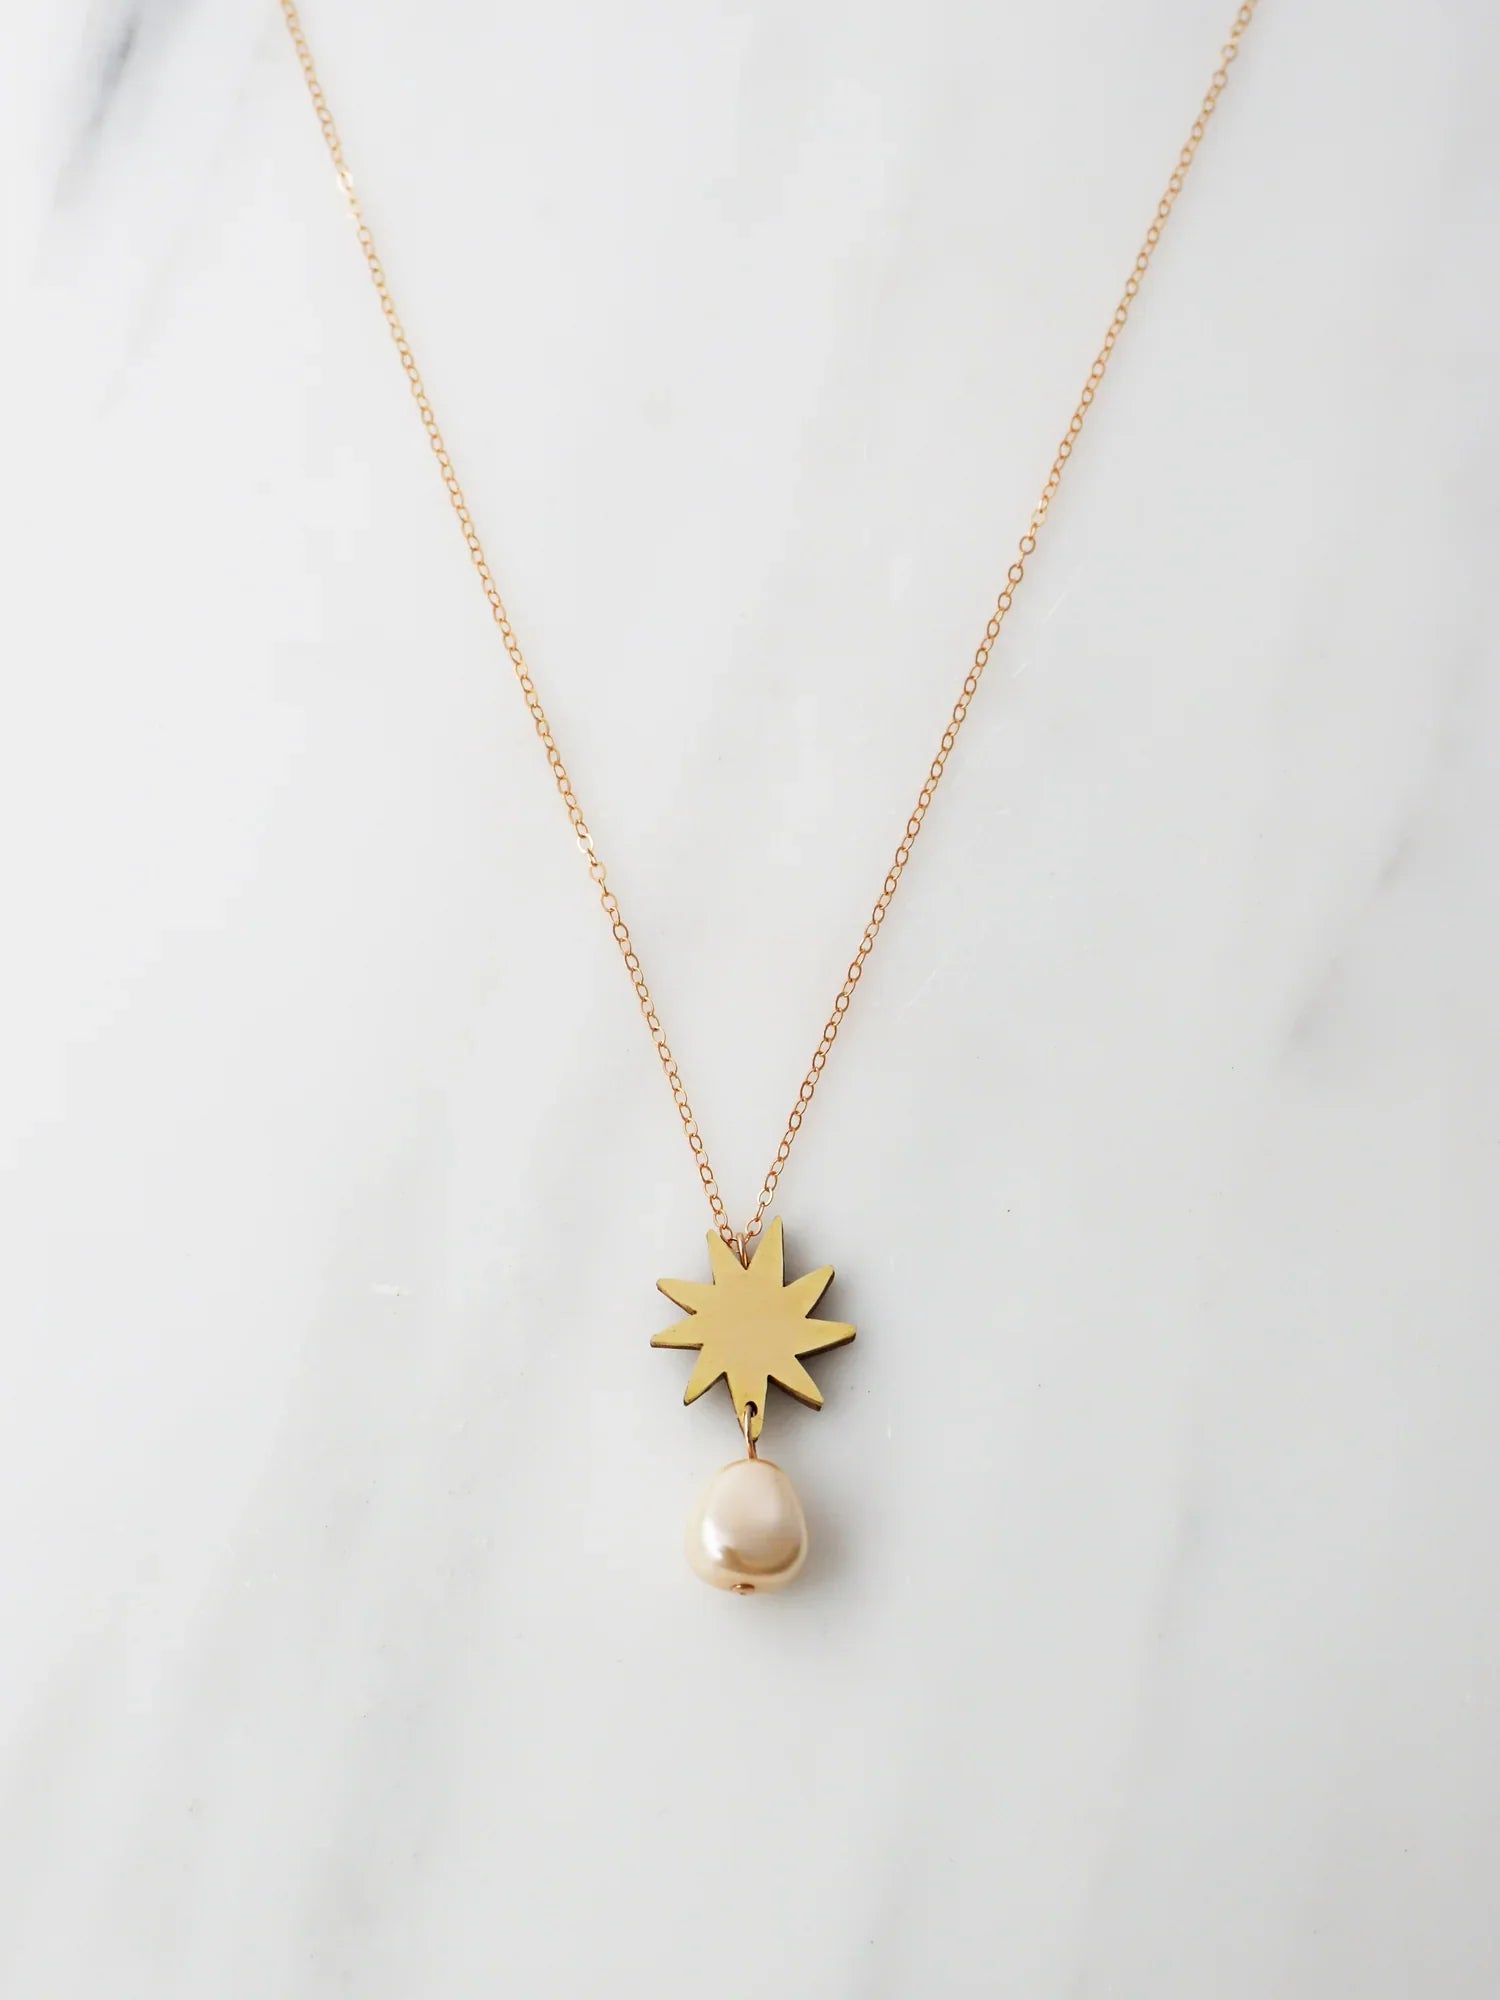 The Every Space Kara necklace with gold filled chain and brass pendant by Wolf & Moon